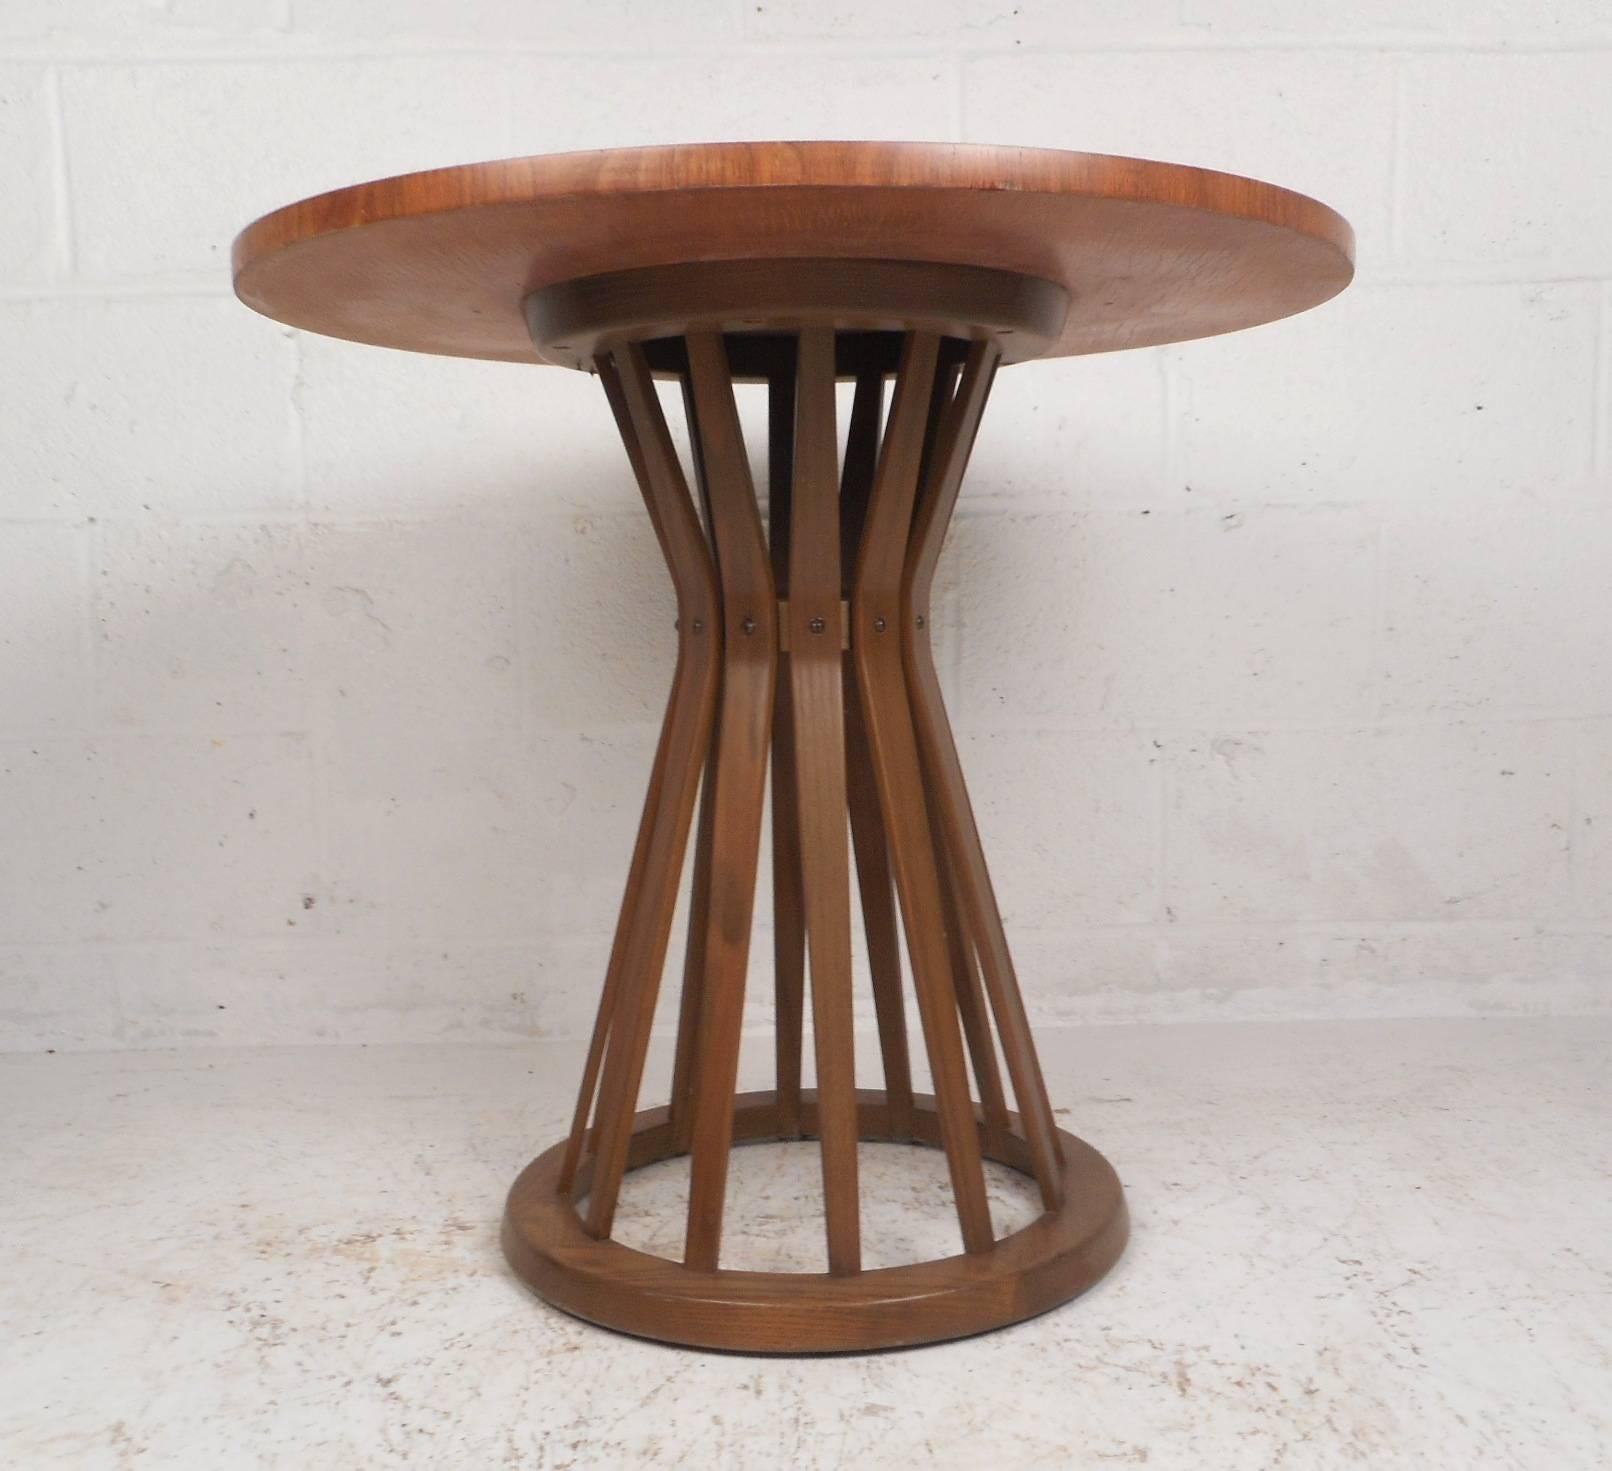 This iconic Mid-Century Modern side table by Edward Wormley features a gorgeous round top with walnut wood grain. This unique piece has an hourglass shaped base with spindles tapering down to a circular bottom. This stylish vintage modern end table